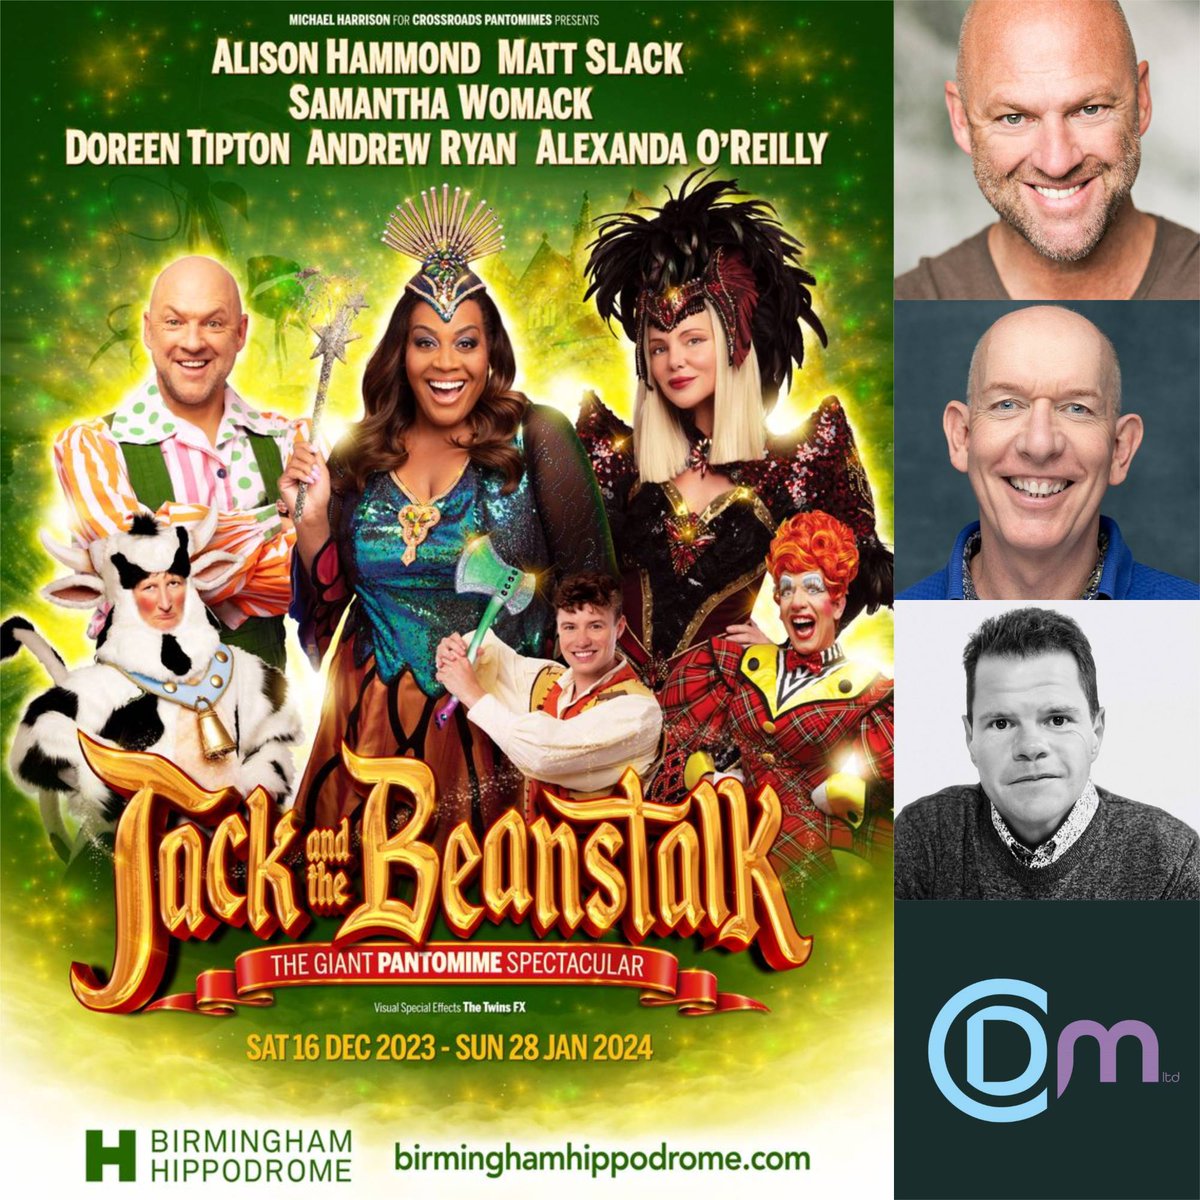 Banish those January blues with a trip to the legendary Birmingham Hippodrome pantomime starring clients MATT SLACK (@TheMattSlack) & ANDREW RYAN (@andrewryanactor). The show also features lighting design by BEN CRACKNELL (@bcracknell) and runs until 28 January. @brumhippodrome